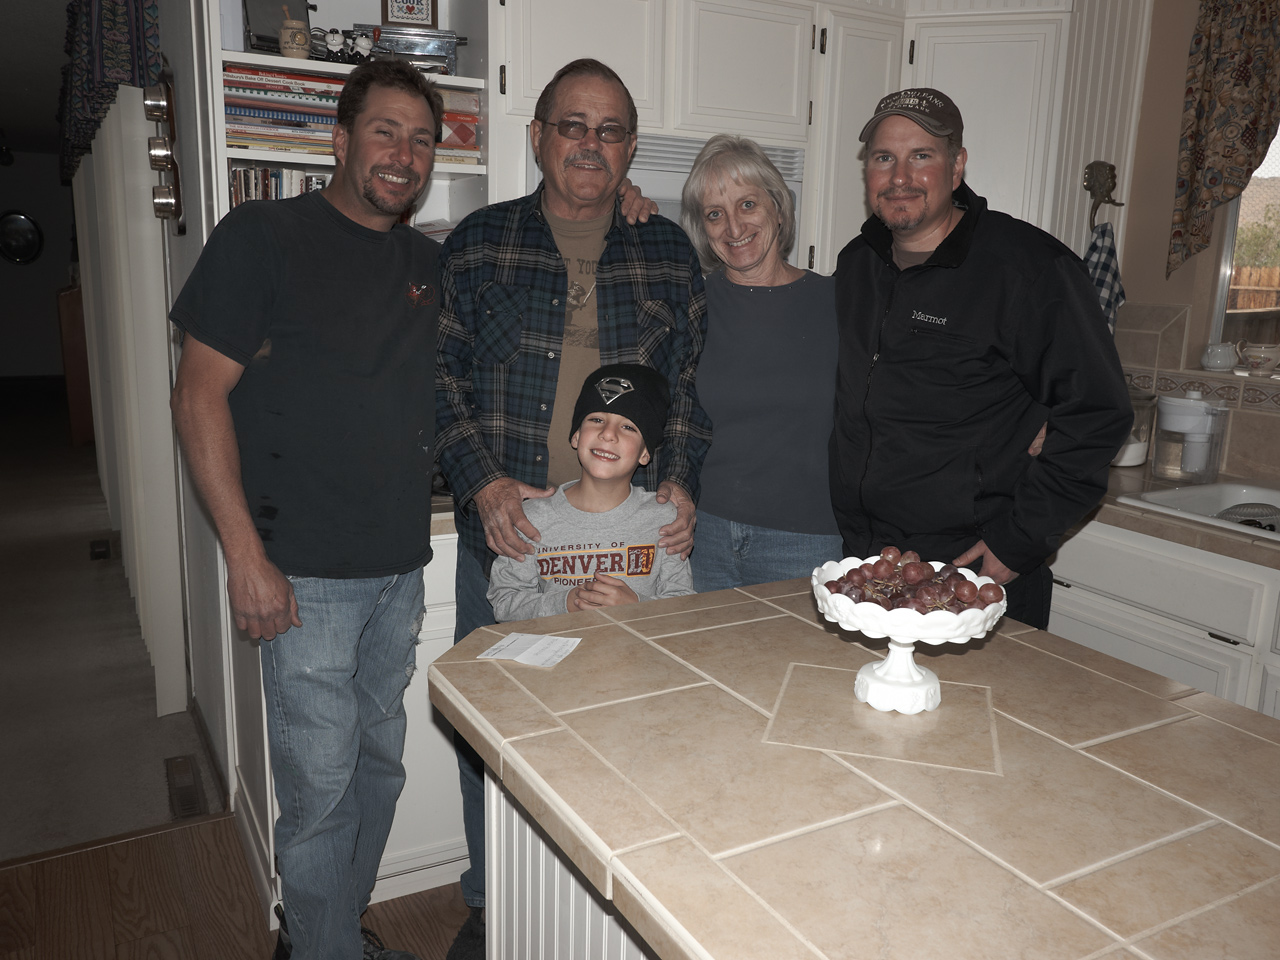 Tom, Tom's son Hunter, Uncle Bill, Lynne, and Marc in Uncle Bill and Lynne's kitchen